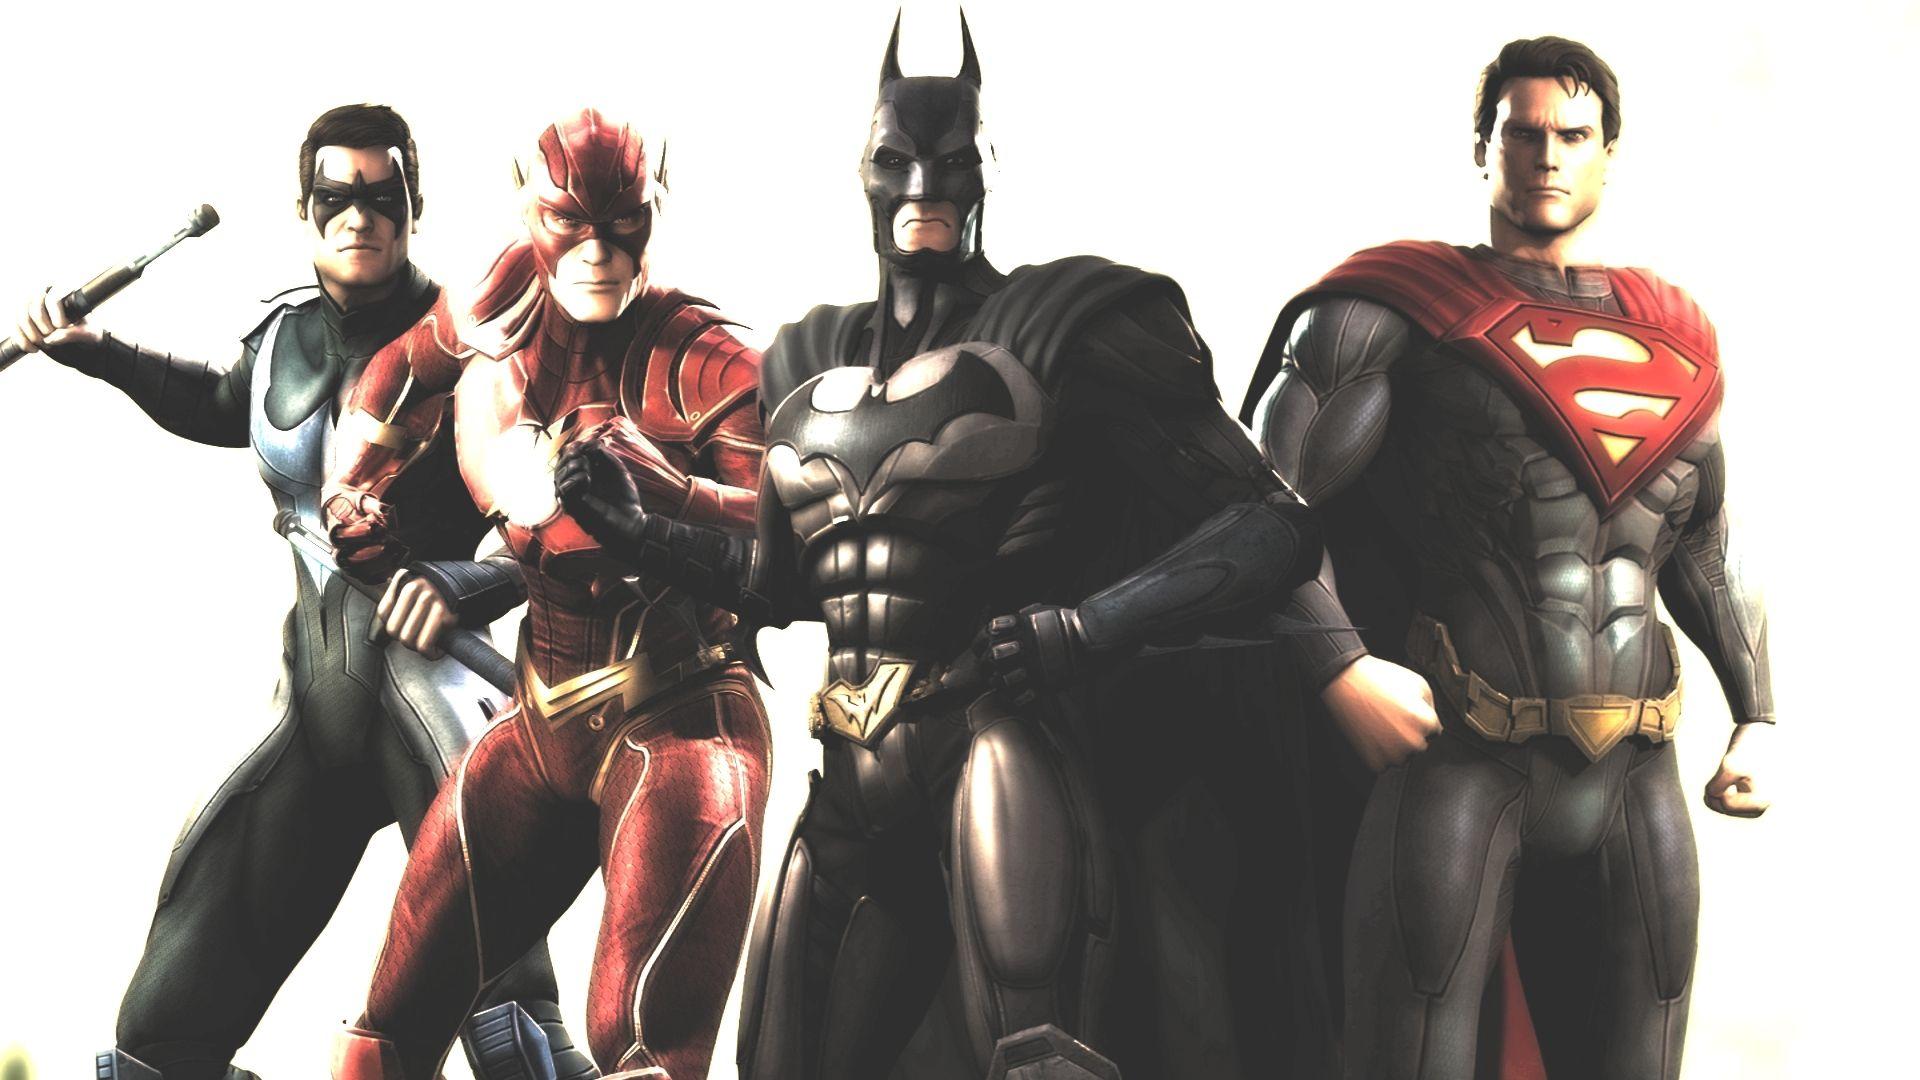 Injustice Gods Among Us picture, wallpaper Injustice Gods Among